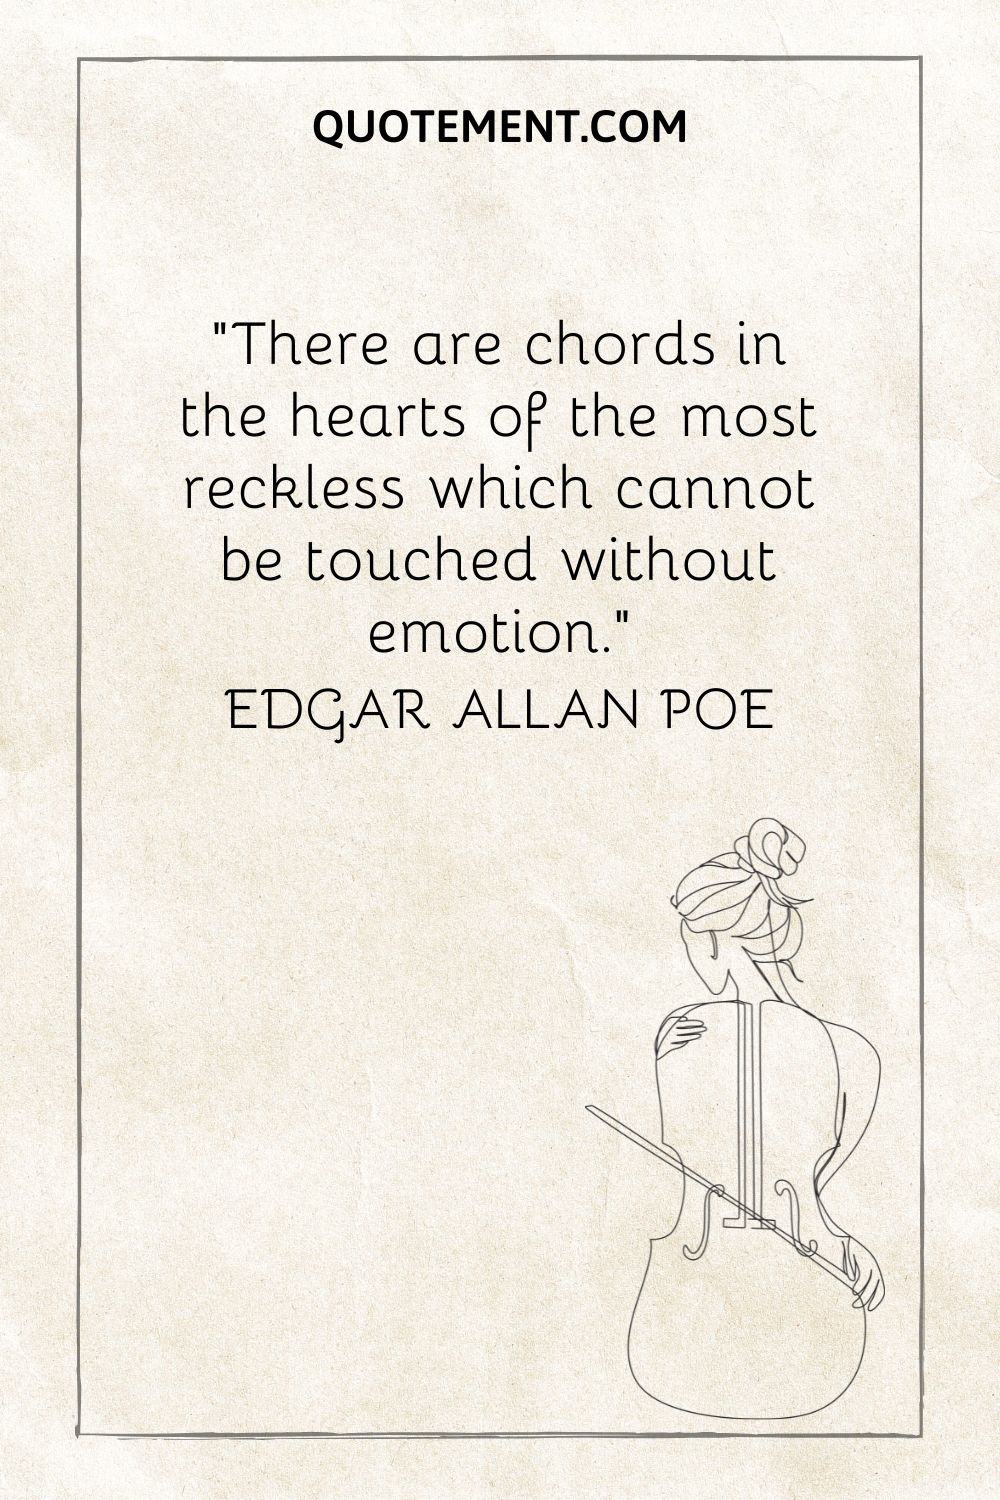 “There are chords in the hearts of the most reckless which cannot be touched without emotion.” — Edgar Allan Poe